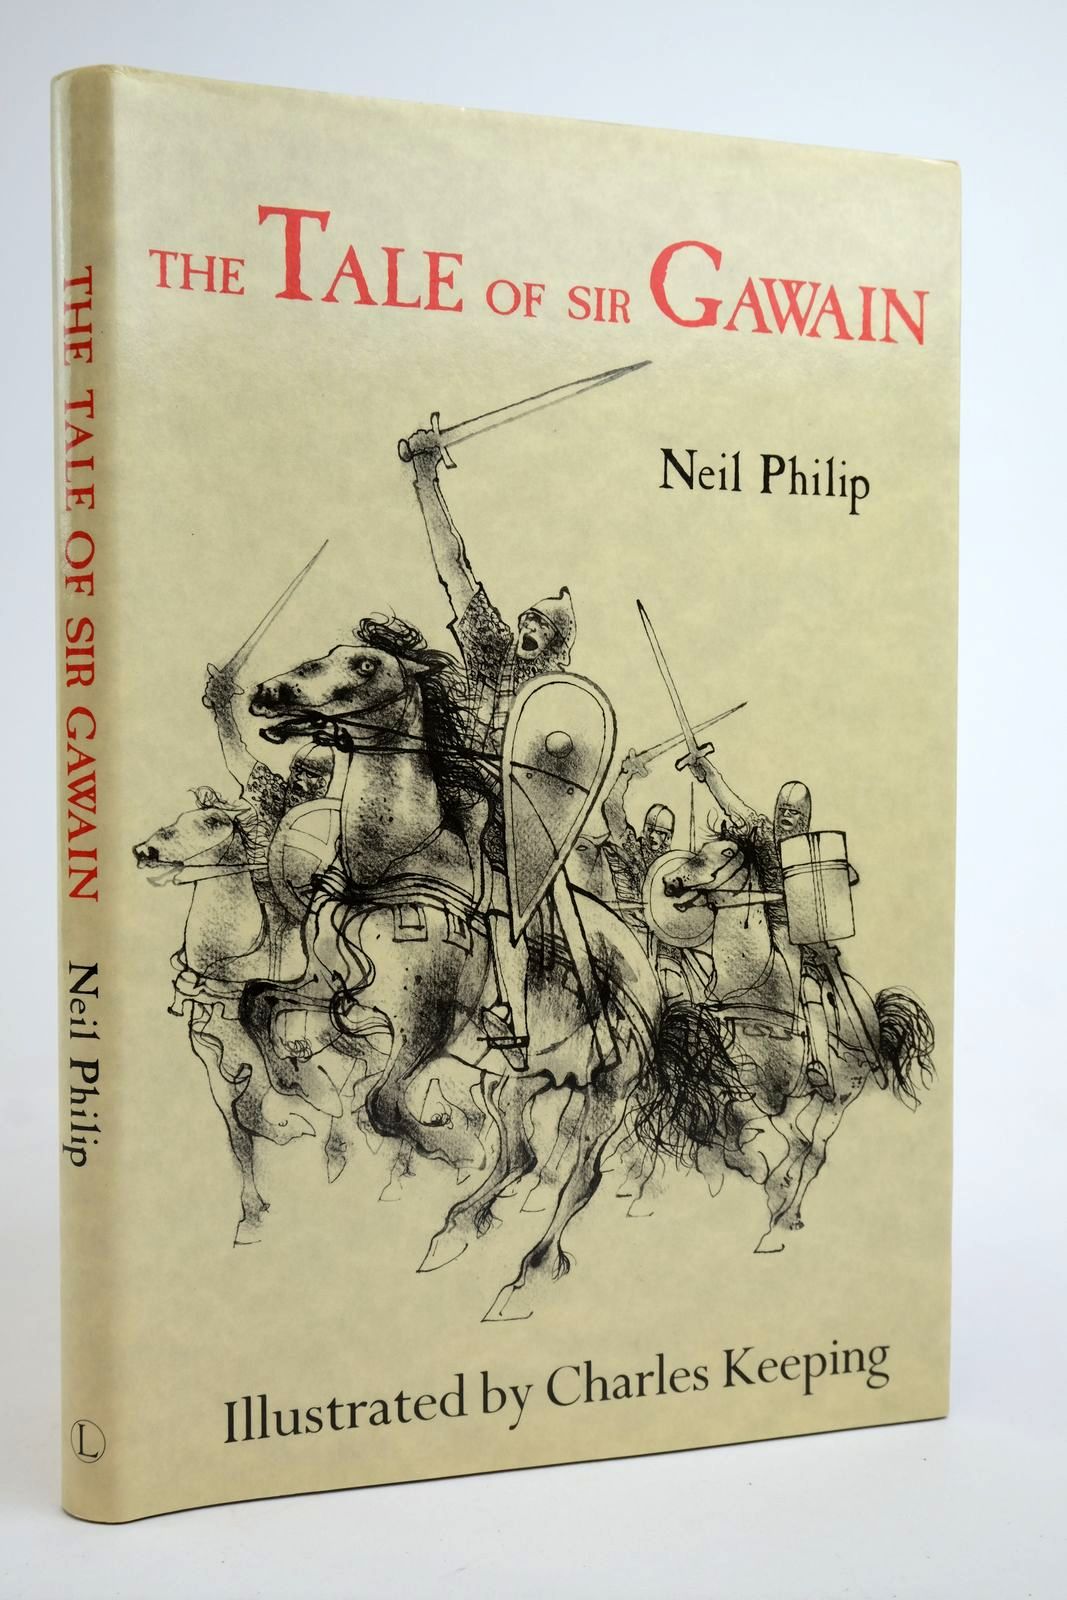 Photo of THE TALE OF SIR GAWAIN written by Philip, Neil illustrated by Keeping, Charles published by Lutterworth Press (STOCK CODE: 2135737)  for sale by Stella & Rose's Books